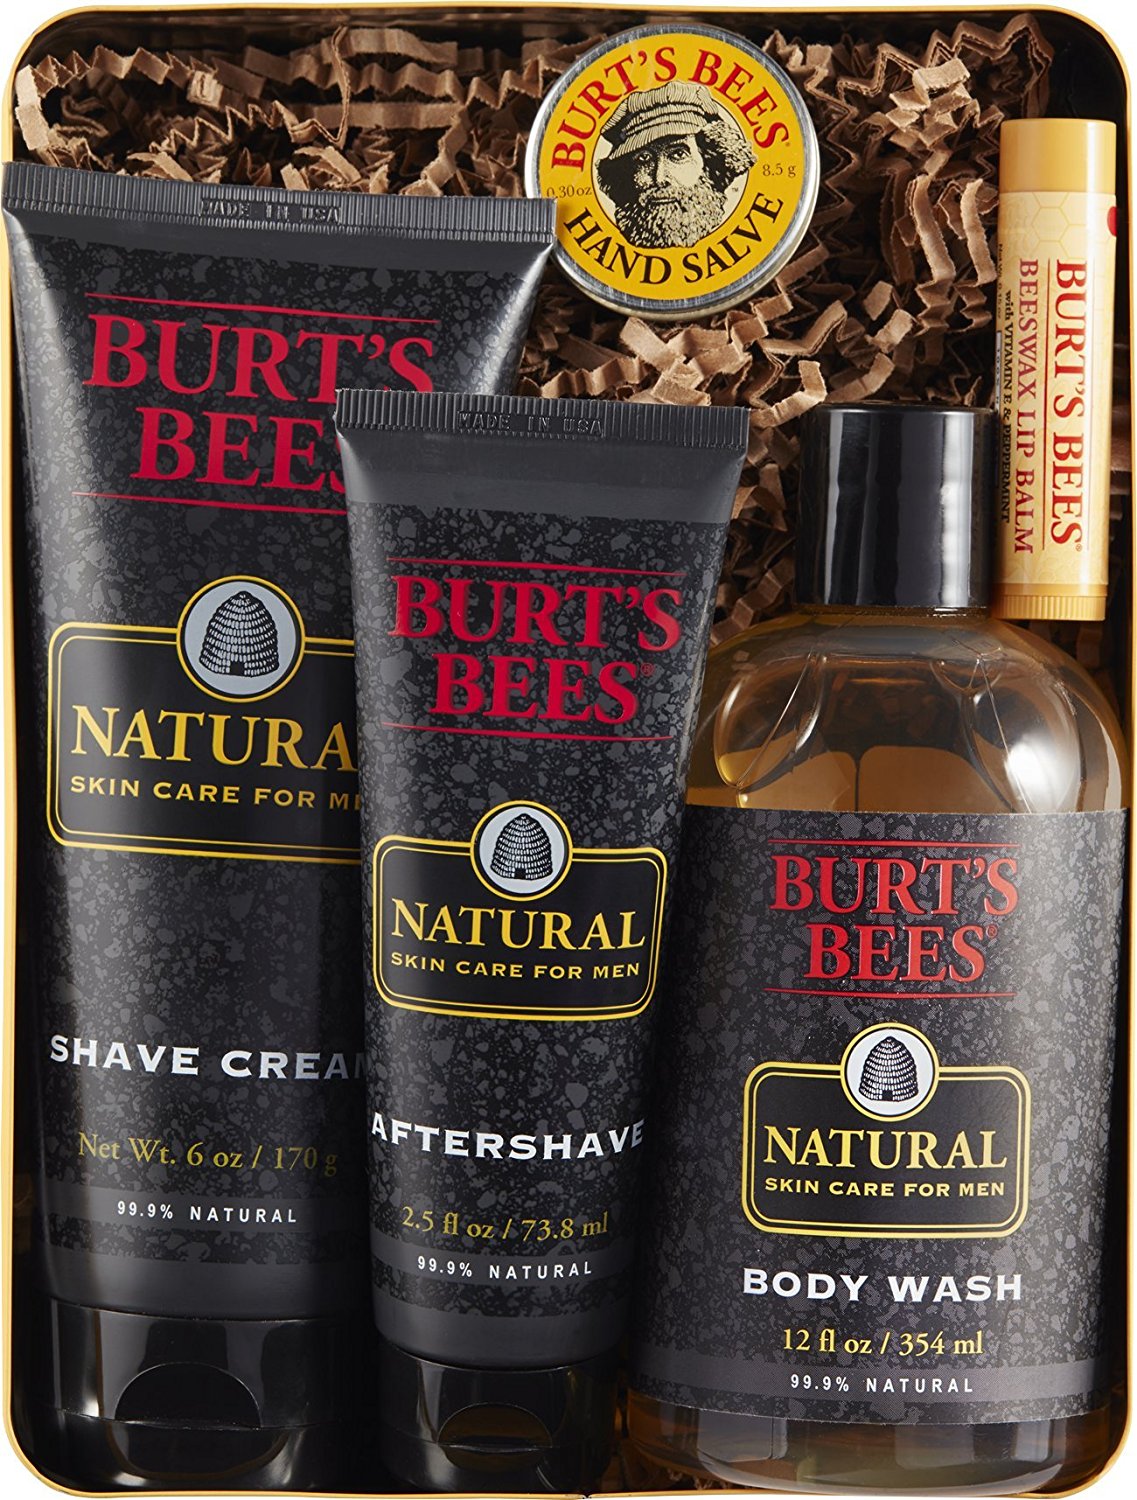 Burt’s Bees Men’s Gift Set – 5 Products in Giftable Tin – Just $20.00!